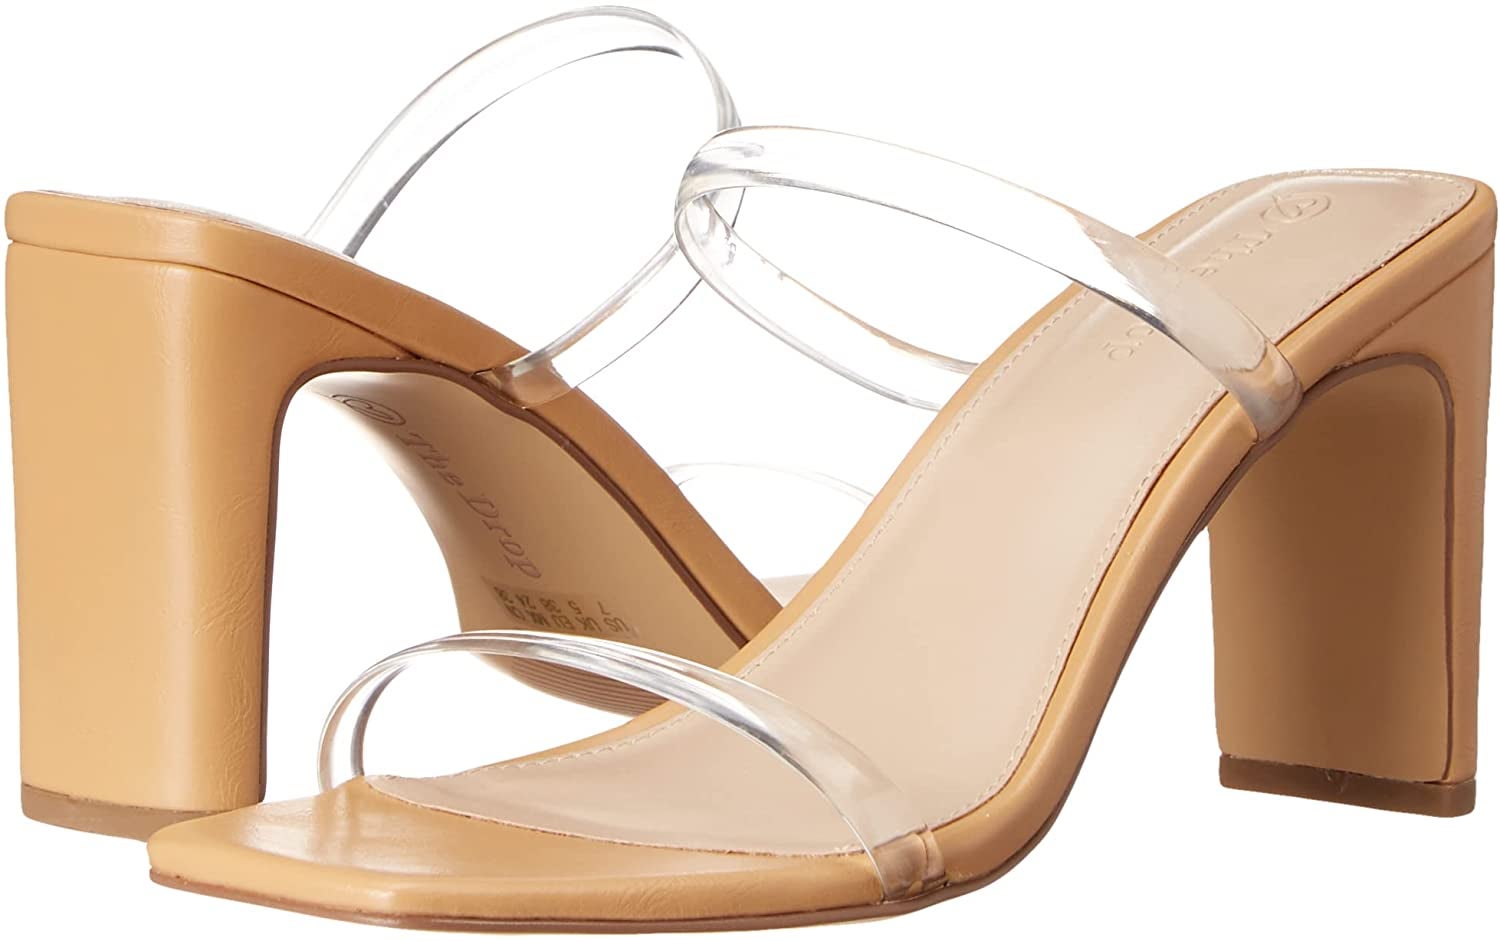 Image of the beige heel sandals with clear straps